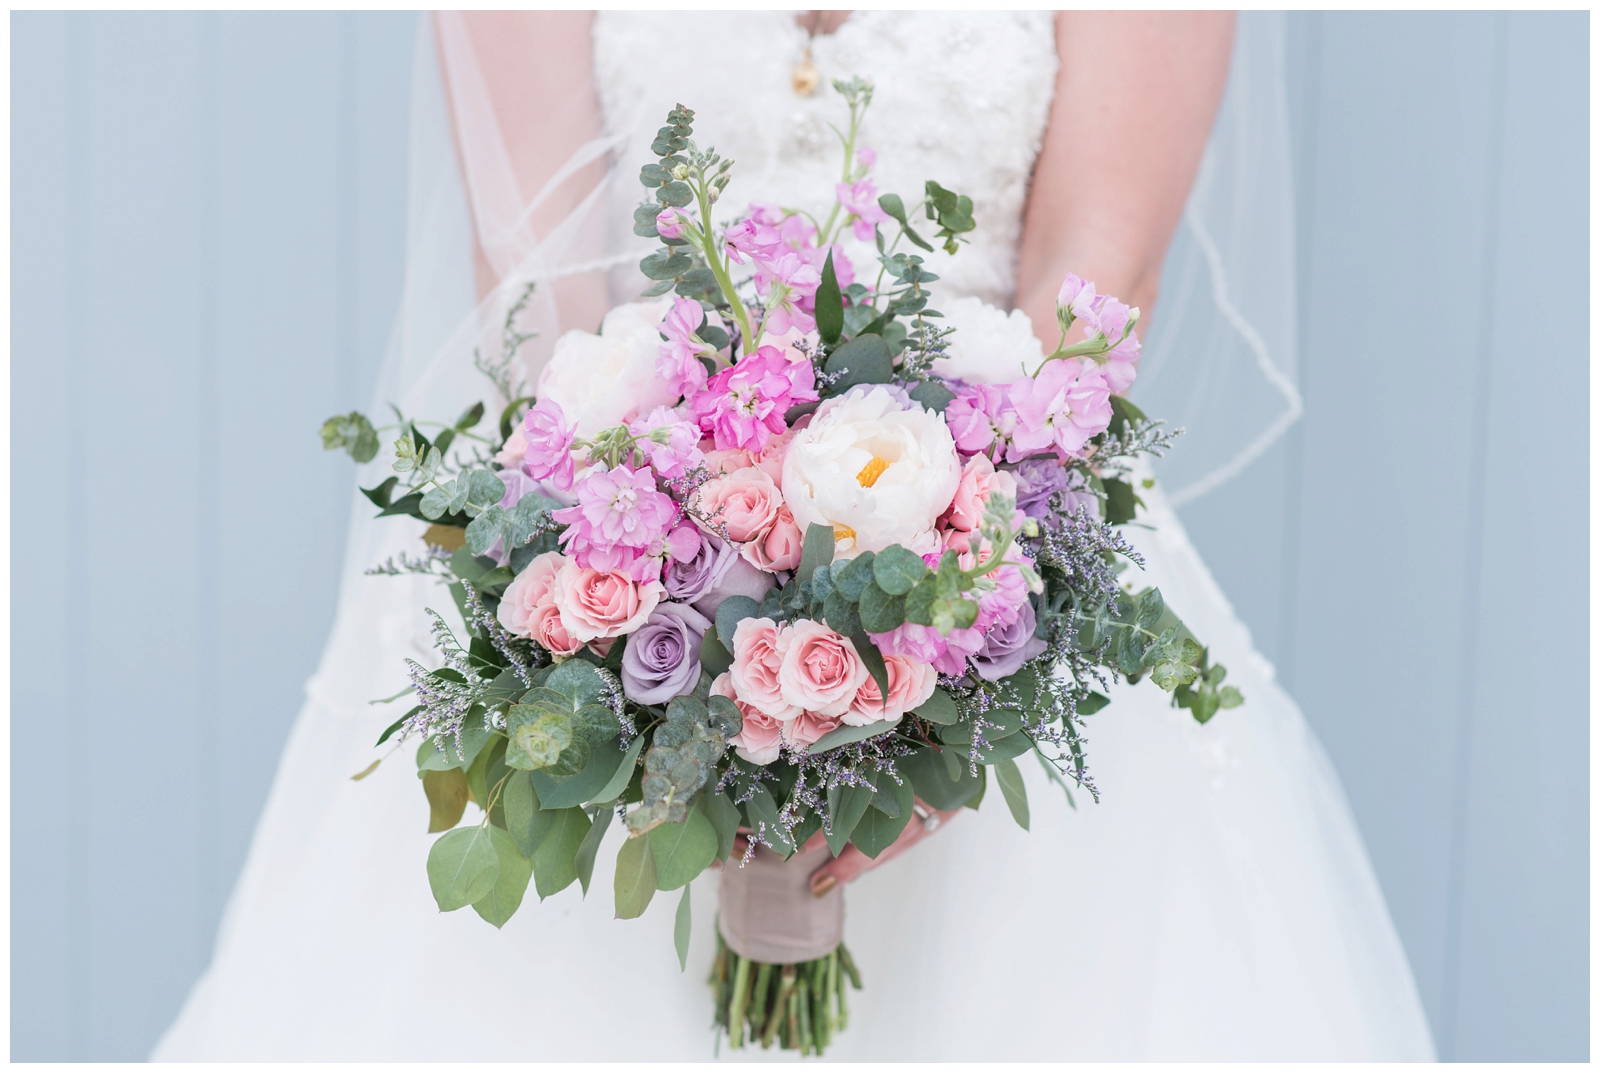 spring wedding bouquet with white peonies, purple and pink roses held by bride in lace gown